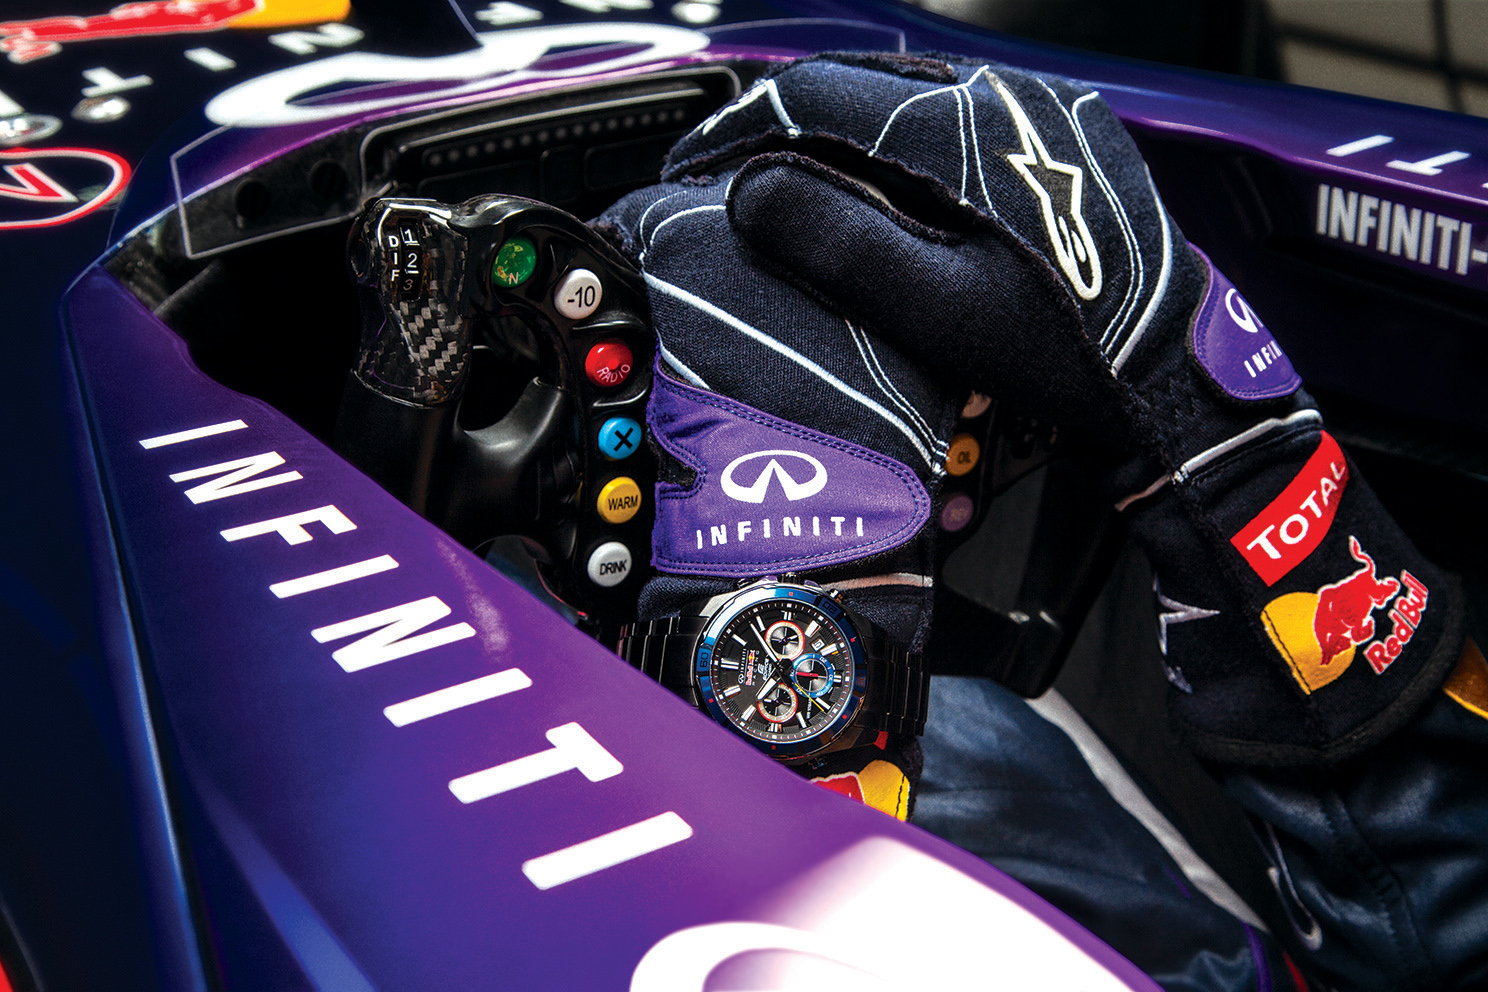 Casio watches shot with the new Red Bull Formula one car